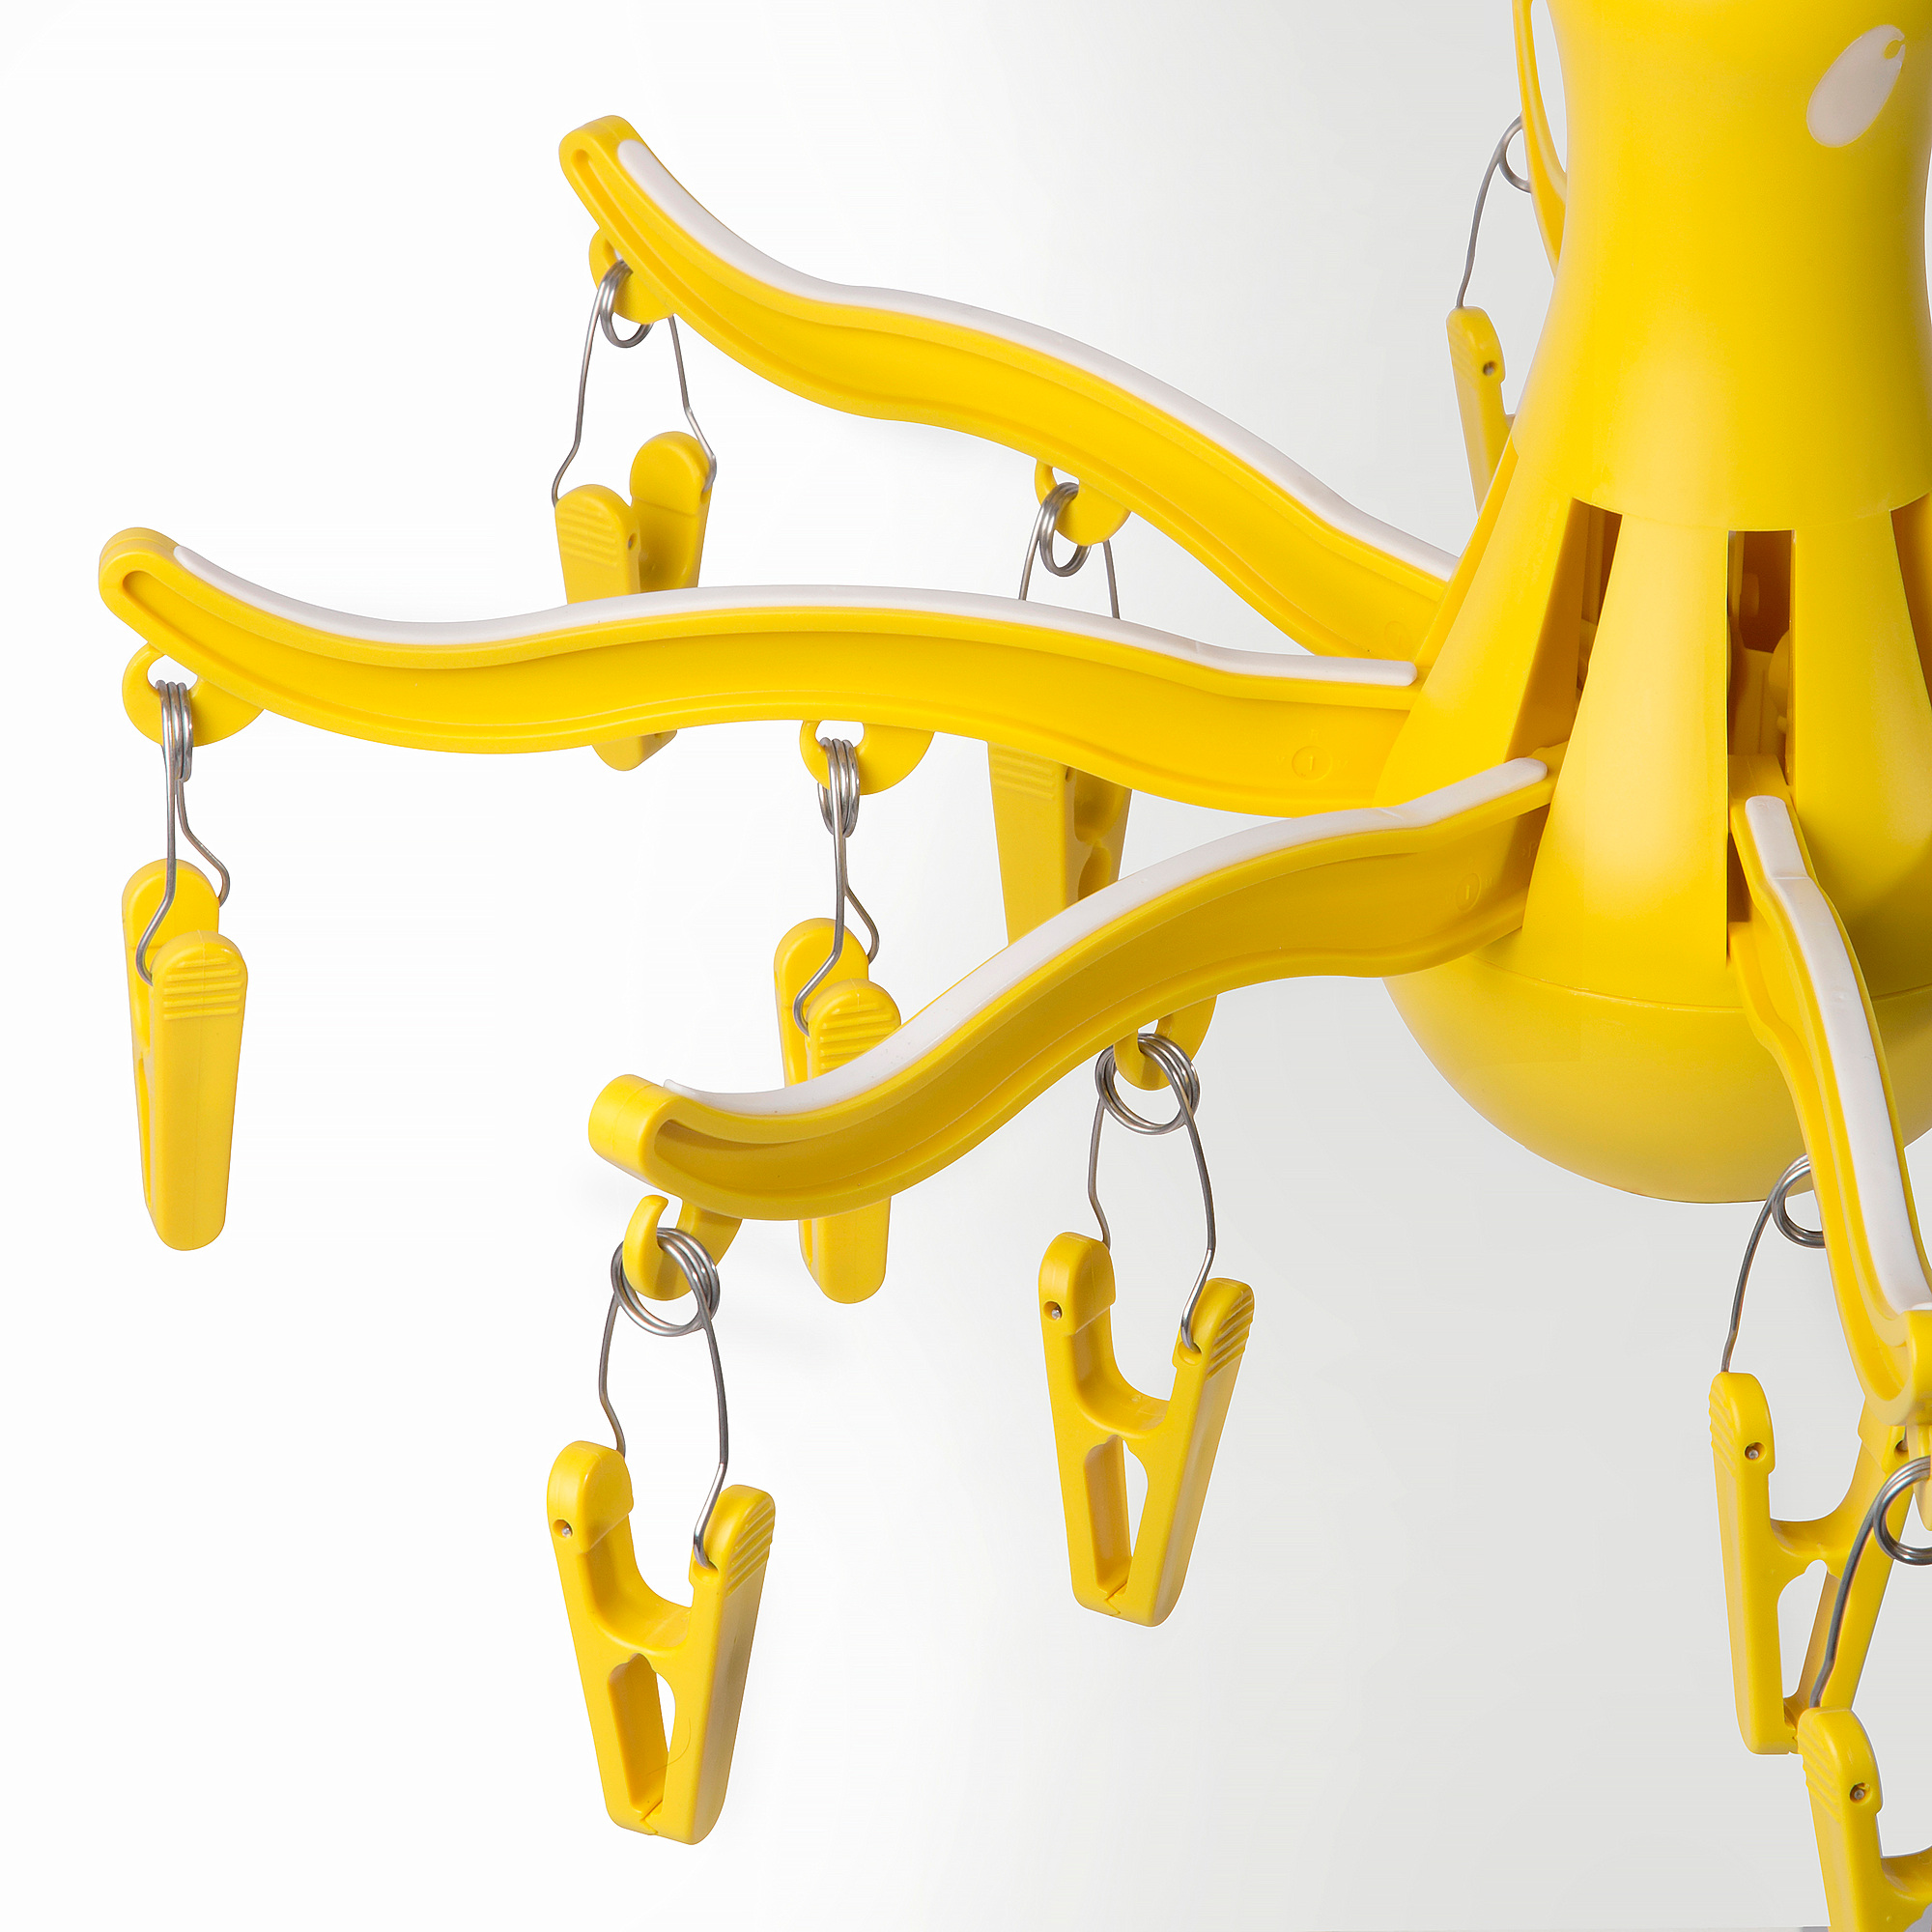 PRESSA hanging dryer 16 clothes pegs